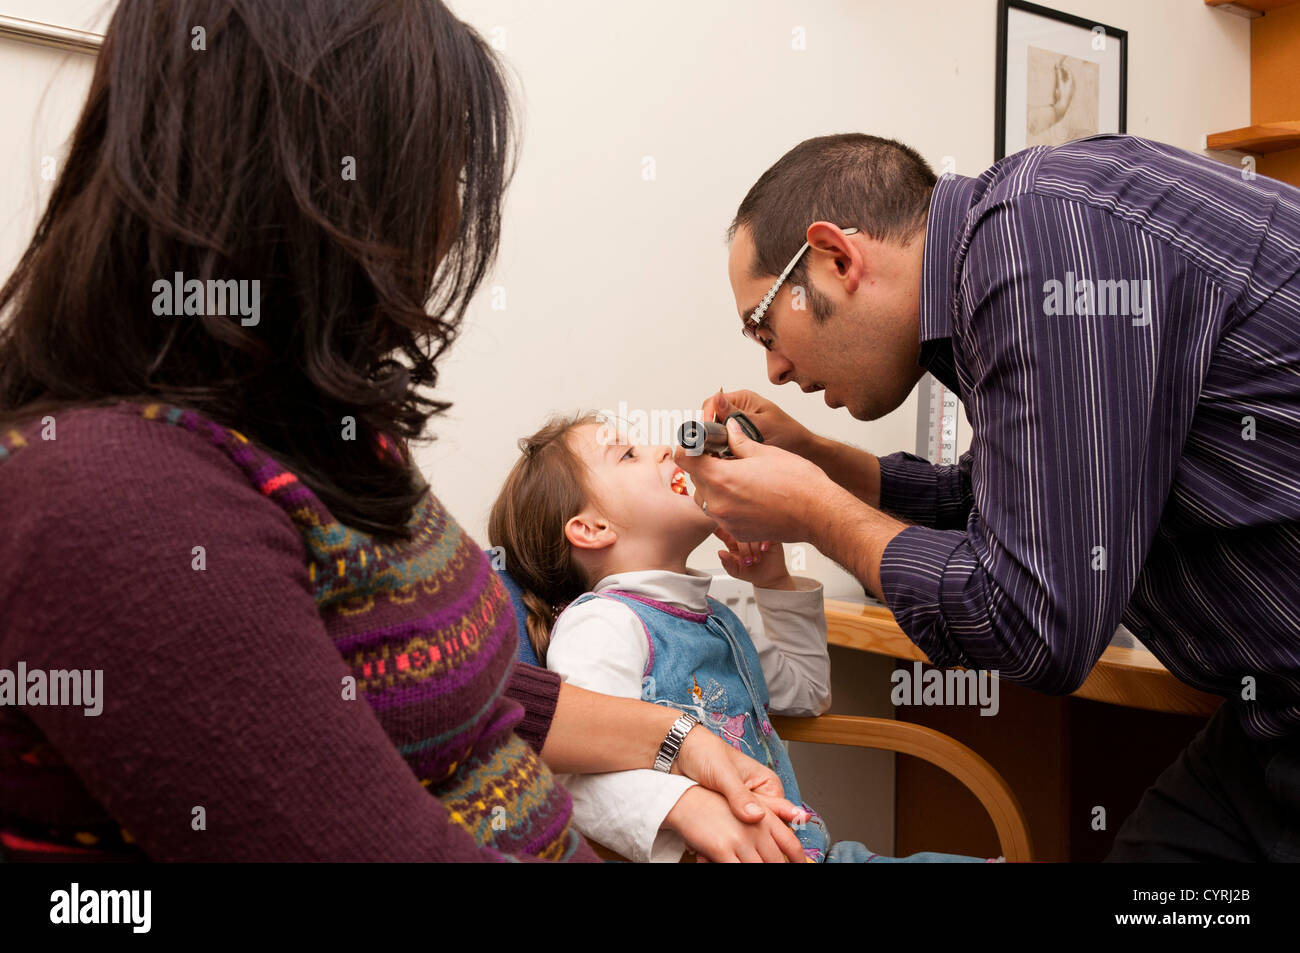 GP Doctor surgery patient consultation. Doctor examines throat of a young child while her Mother watches. UK Stock Photo